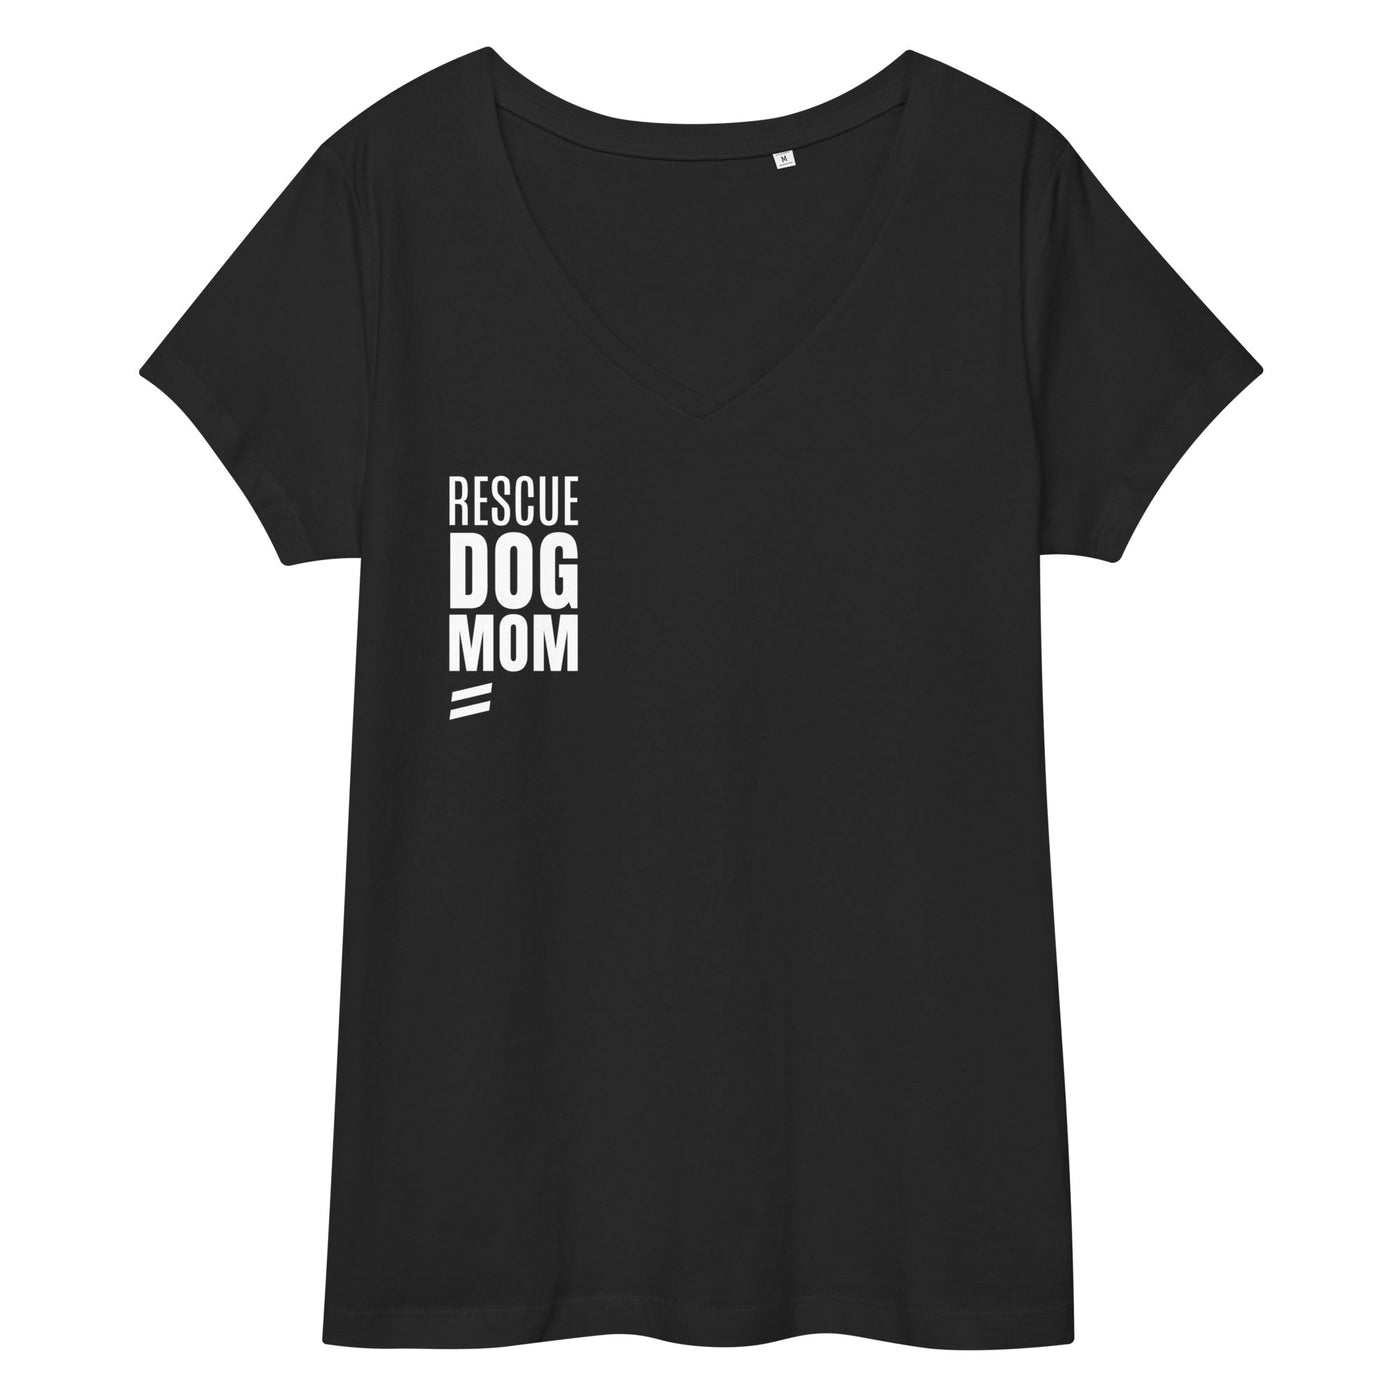 Rescue Dog Mom - Women’s fitted v-neck t-shirt Best Life Leashes | The Symbol For Rescue Dogs XS 